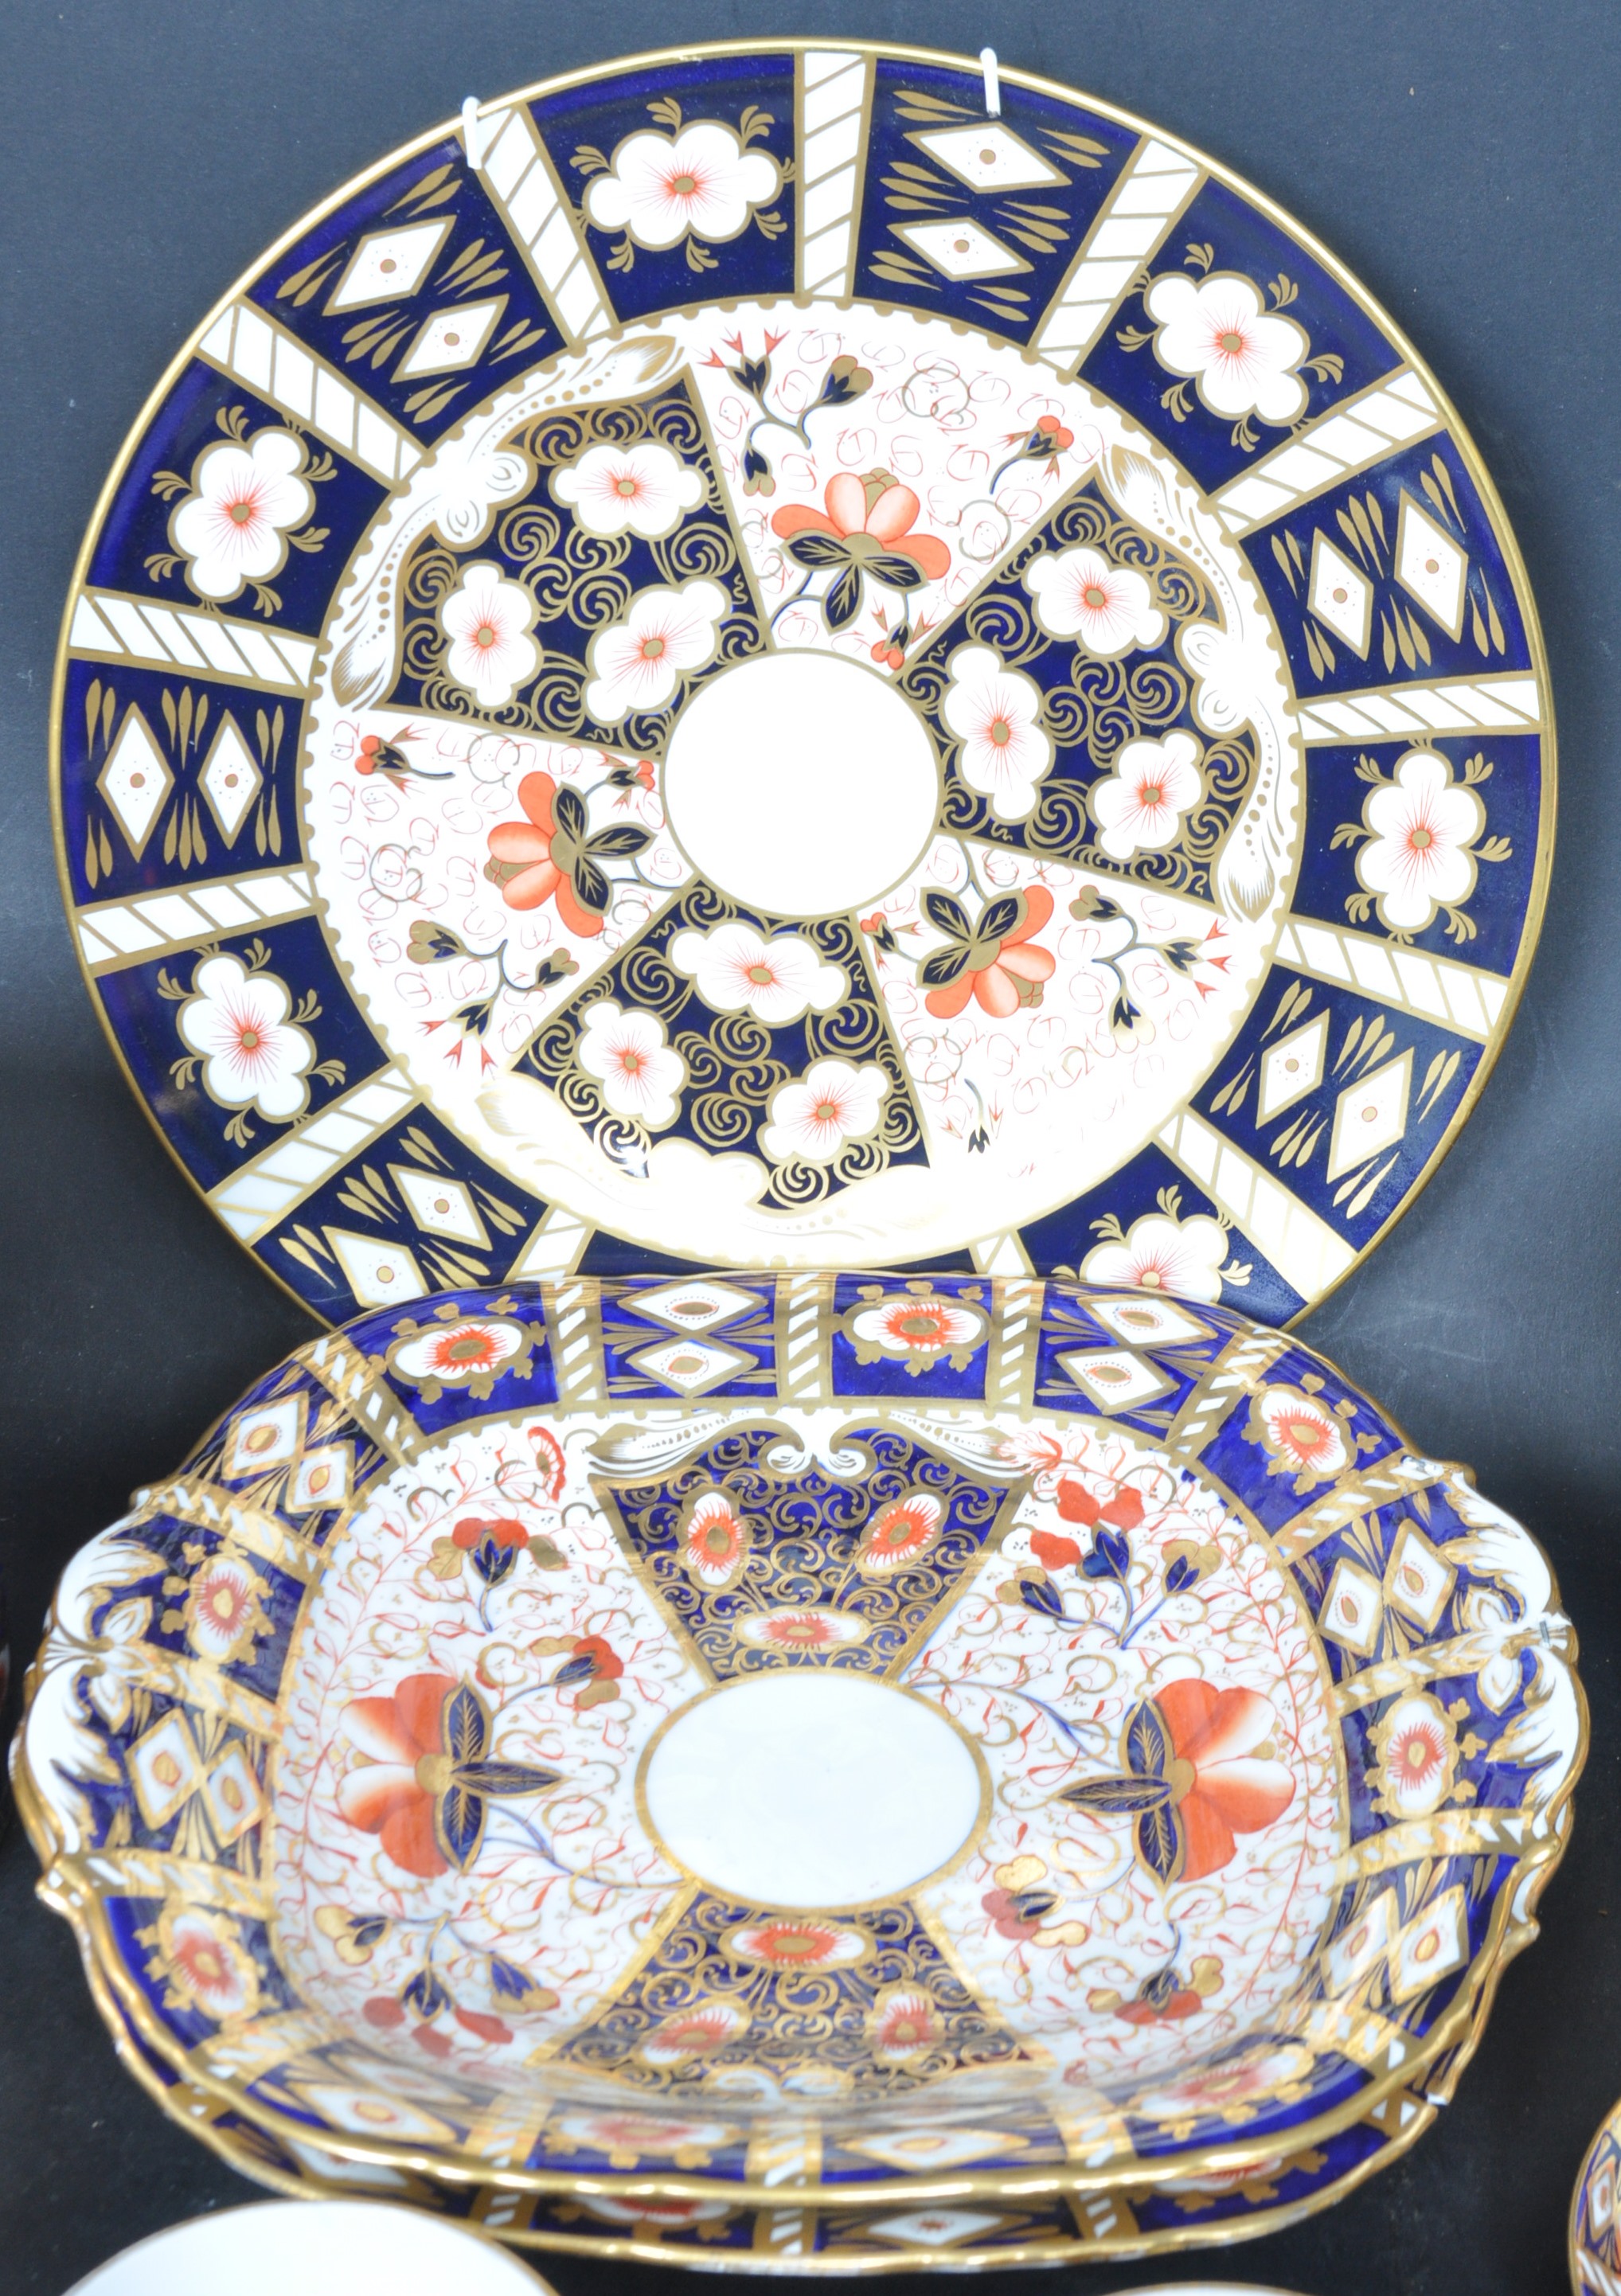 COLLECTION OF VINTAGE 20TH CENTURY ROYQL CROWN DERBY IMARI PATTERN CHINA AND MORE - Image 3 of 14